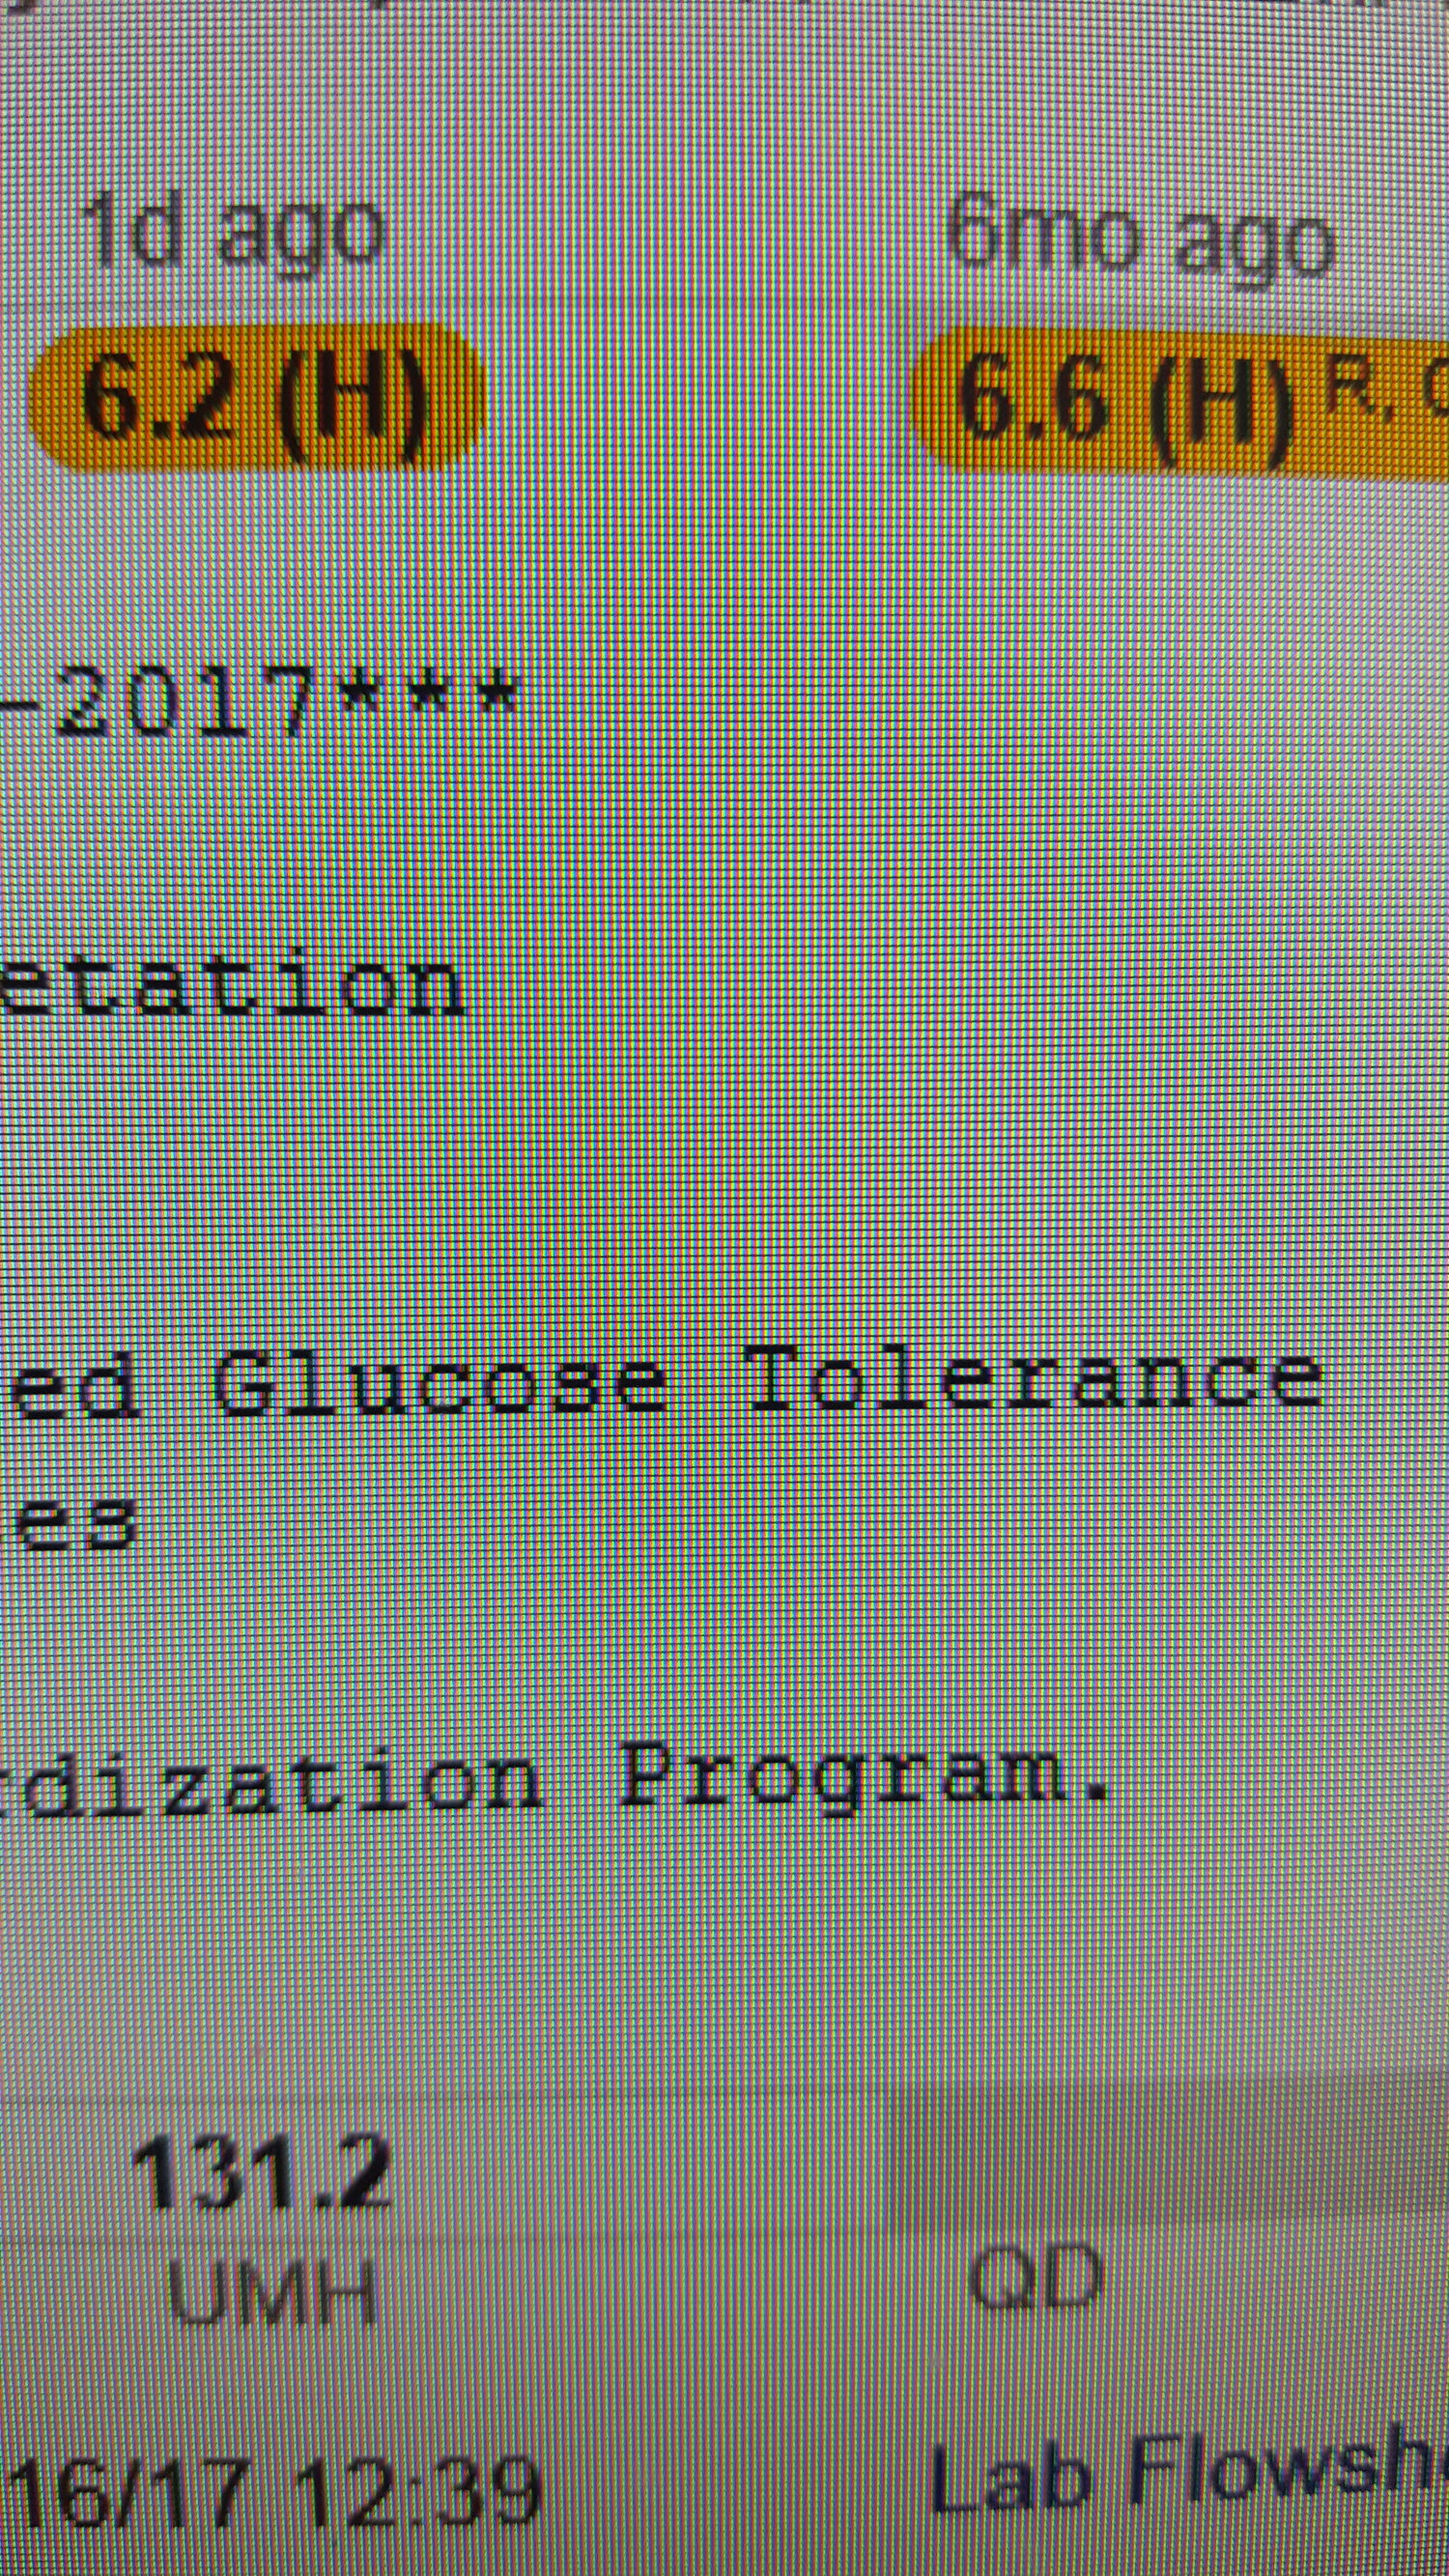 A1c - the average blood sugar over 3 months - here shows a diagnosis of diabetes with a 6.6%. After diet and exercise intervention, the patient's A1c decreased to 6.2%, a level showing control and now prediabetes.